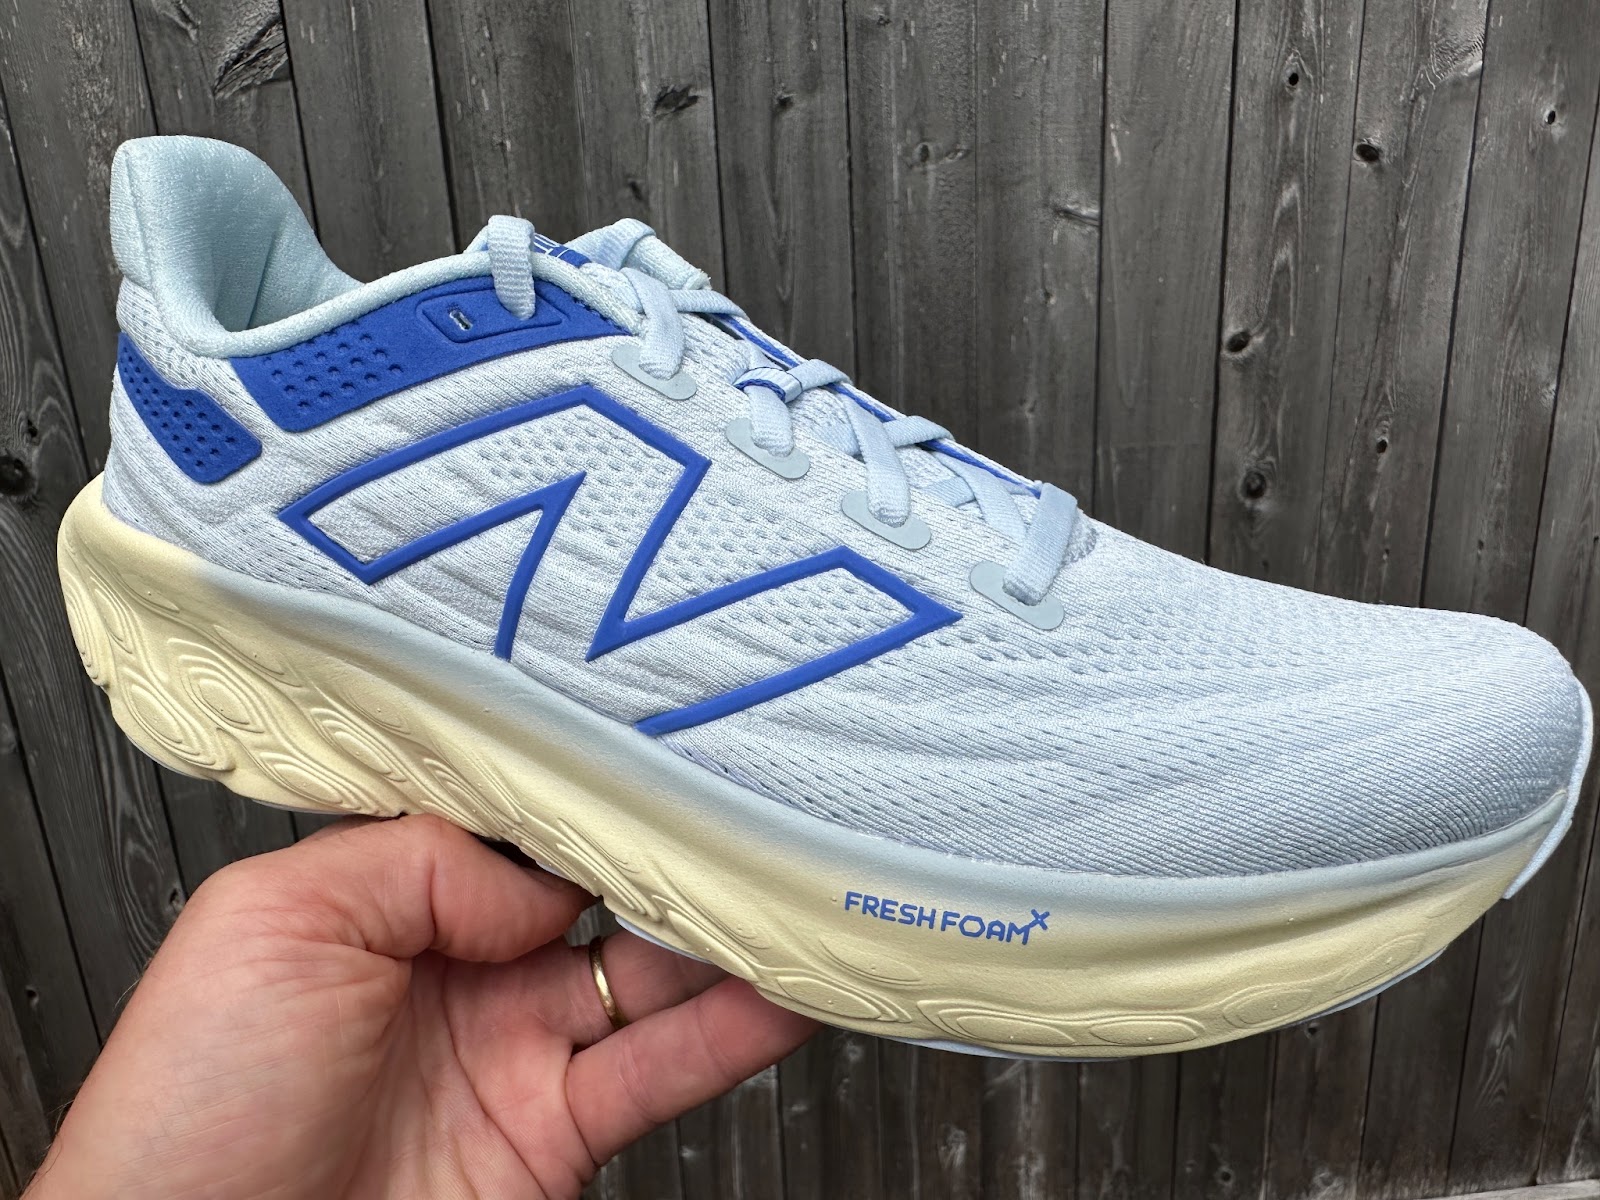 Road Trail Run: New Balance Fresh Foam X 1080 v13 Multi Tester Review:  Bigger, Softer, and Lighter! 9 Comparisons